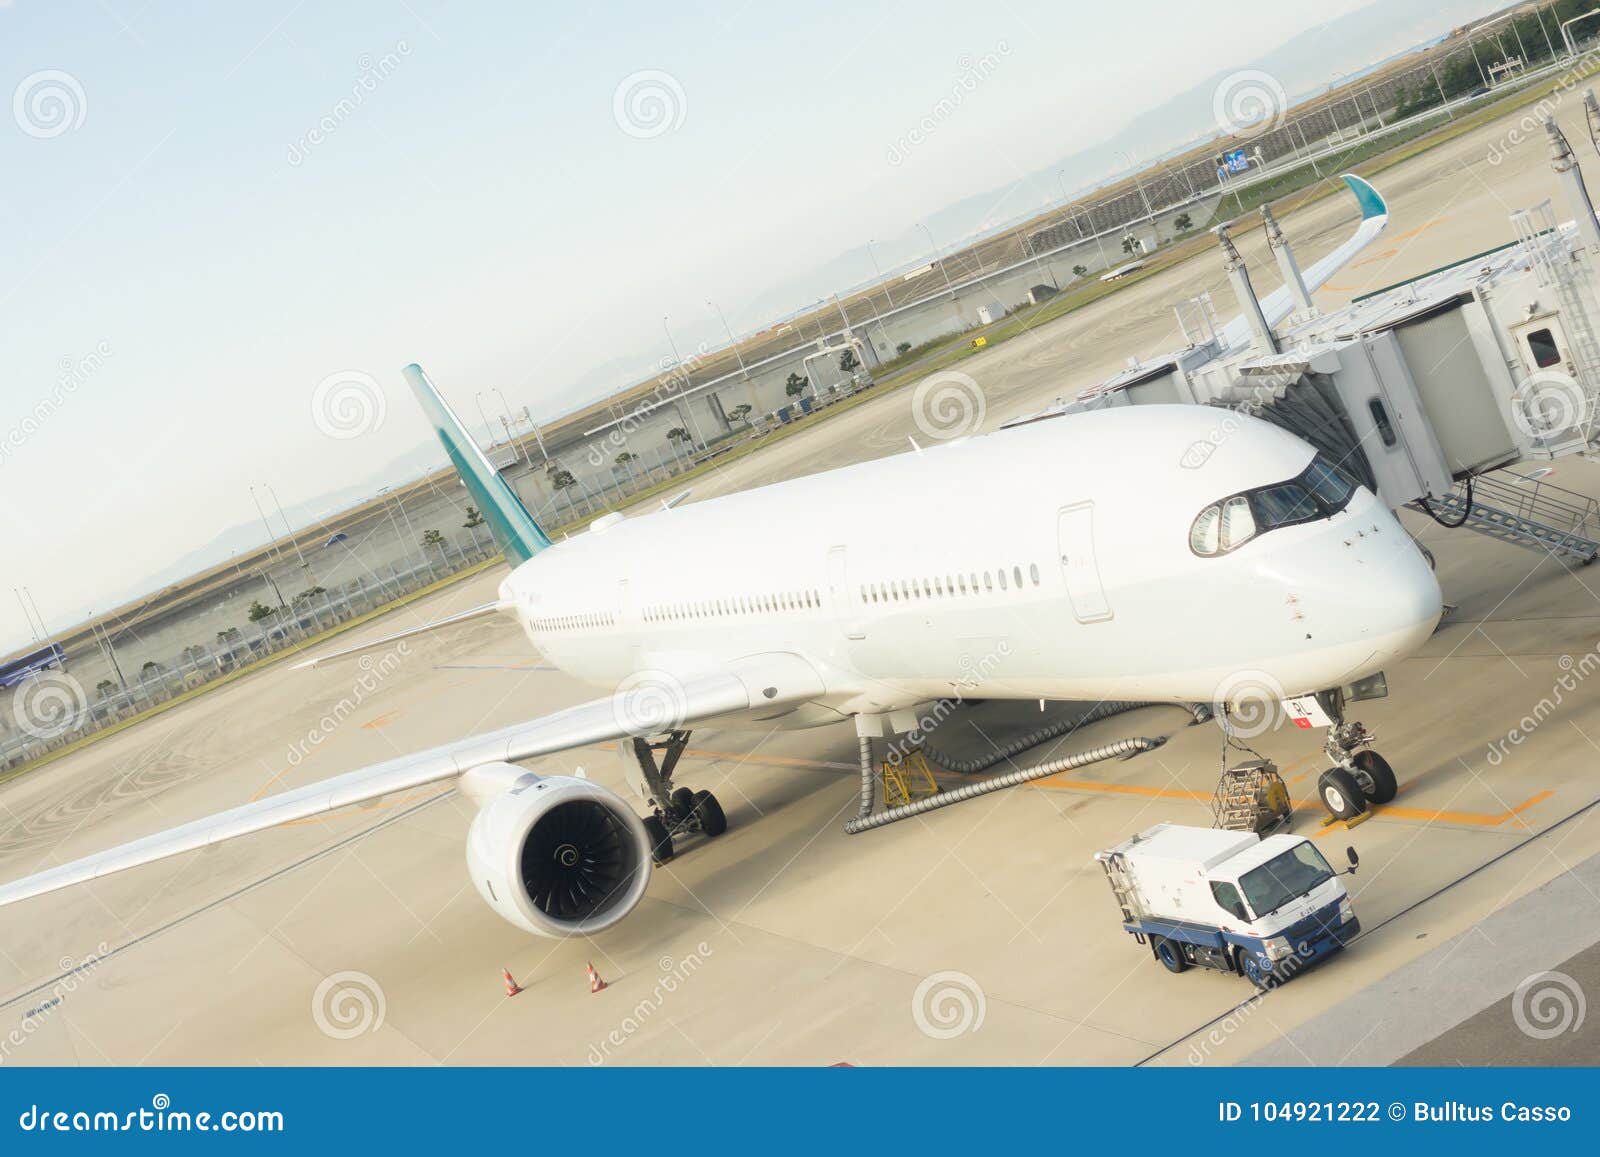 Kaisai, Japan -Oct 27, 2017: Airplane Loading Off Its ...